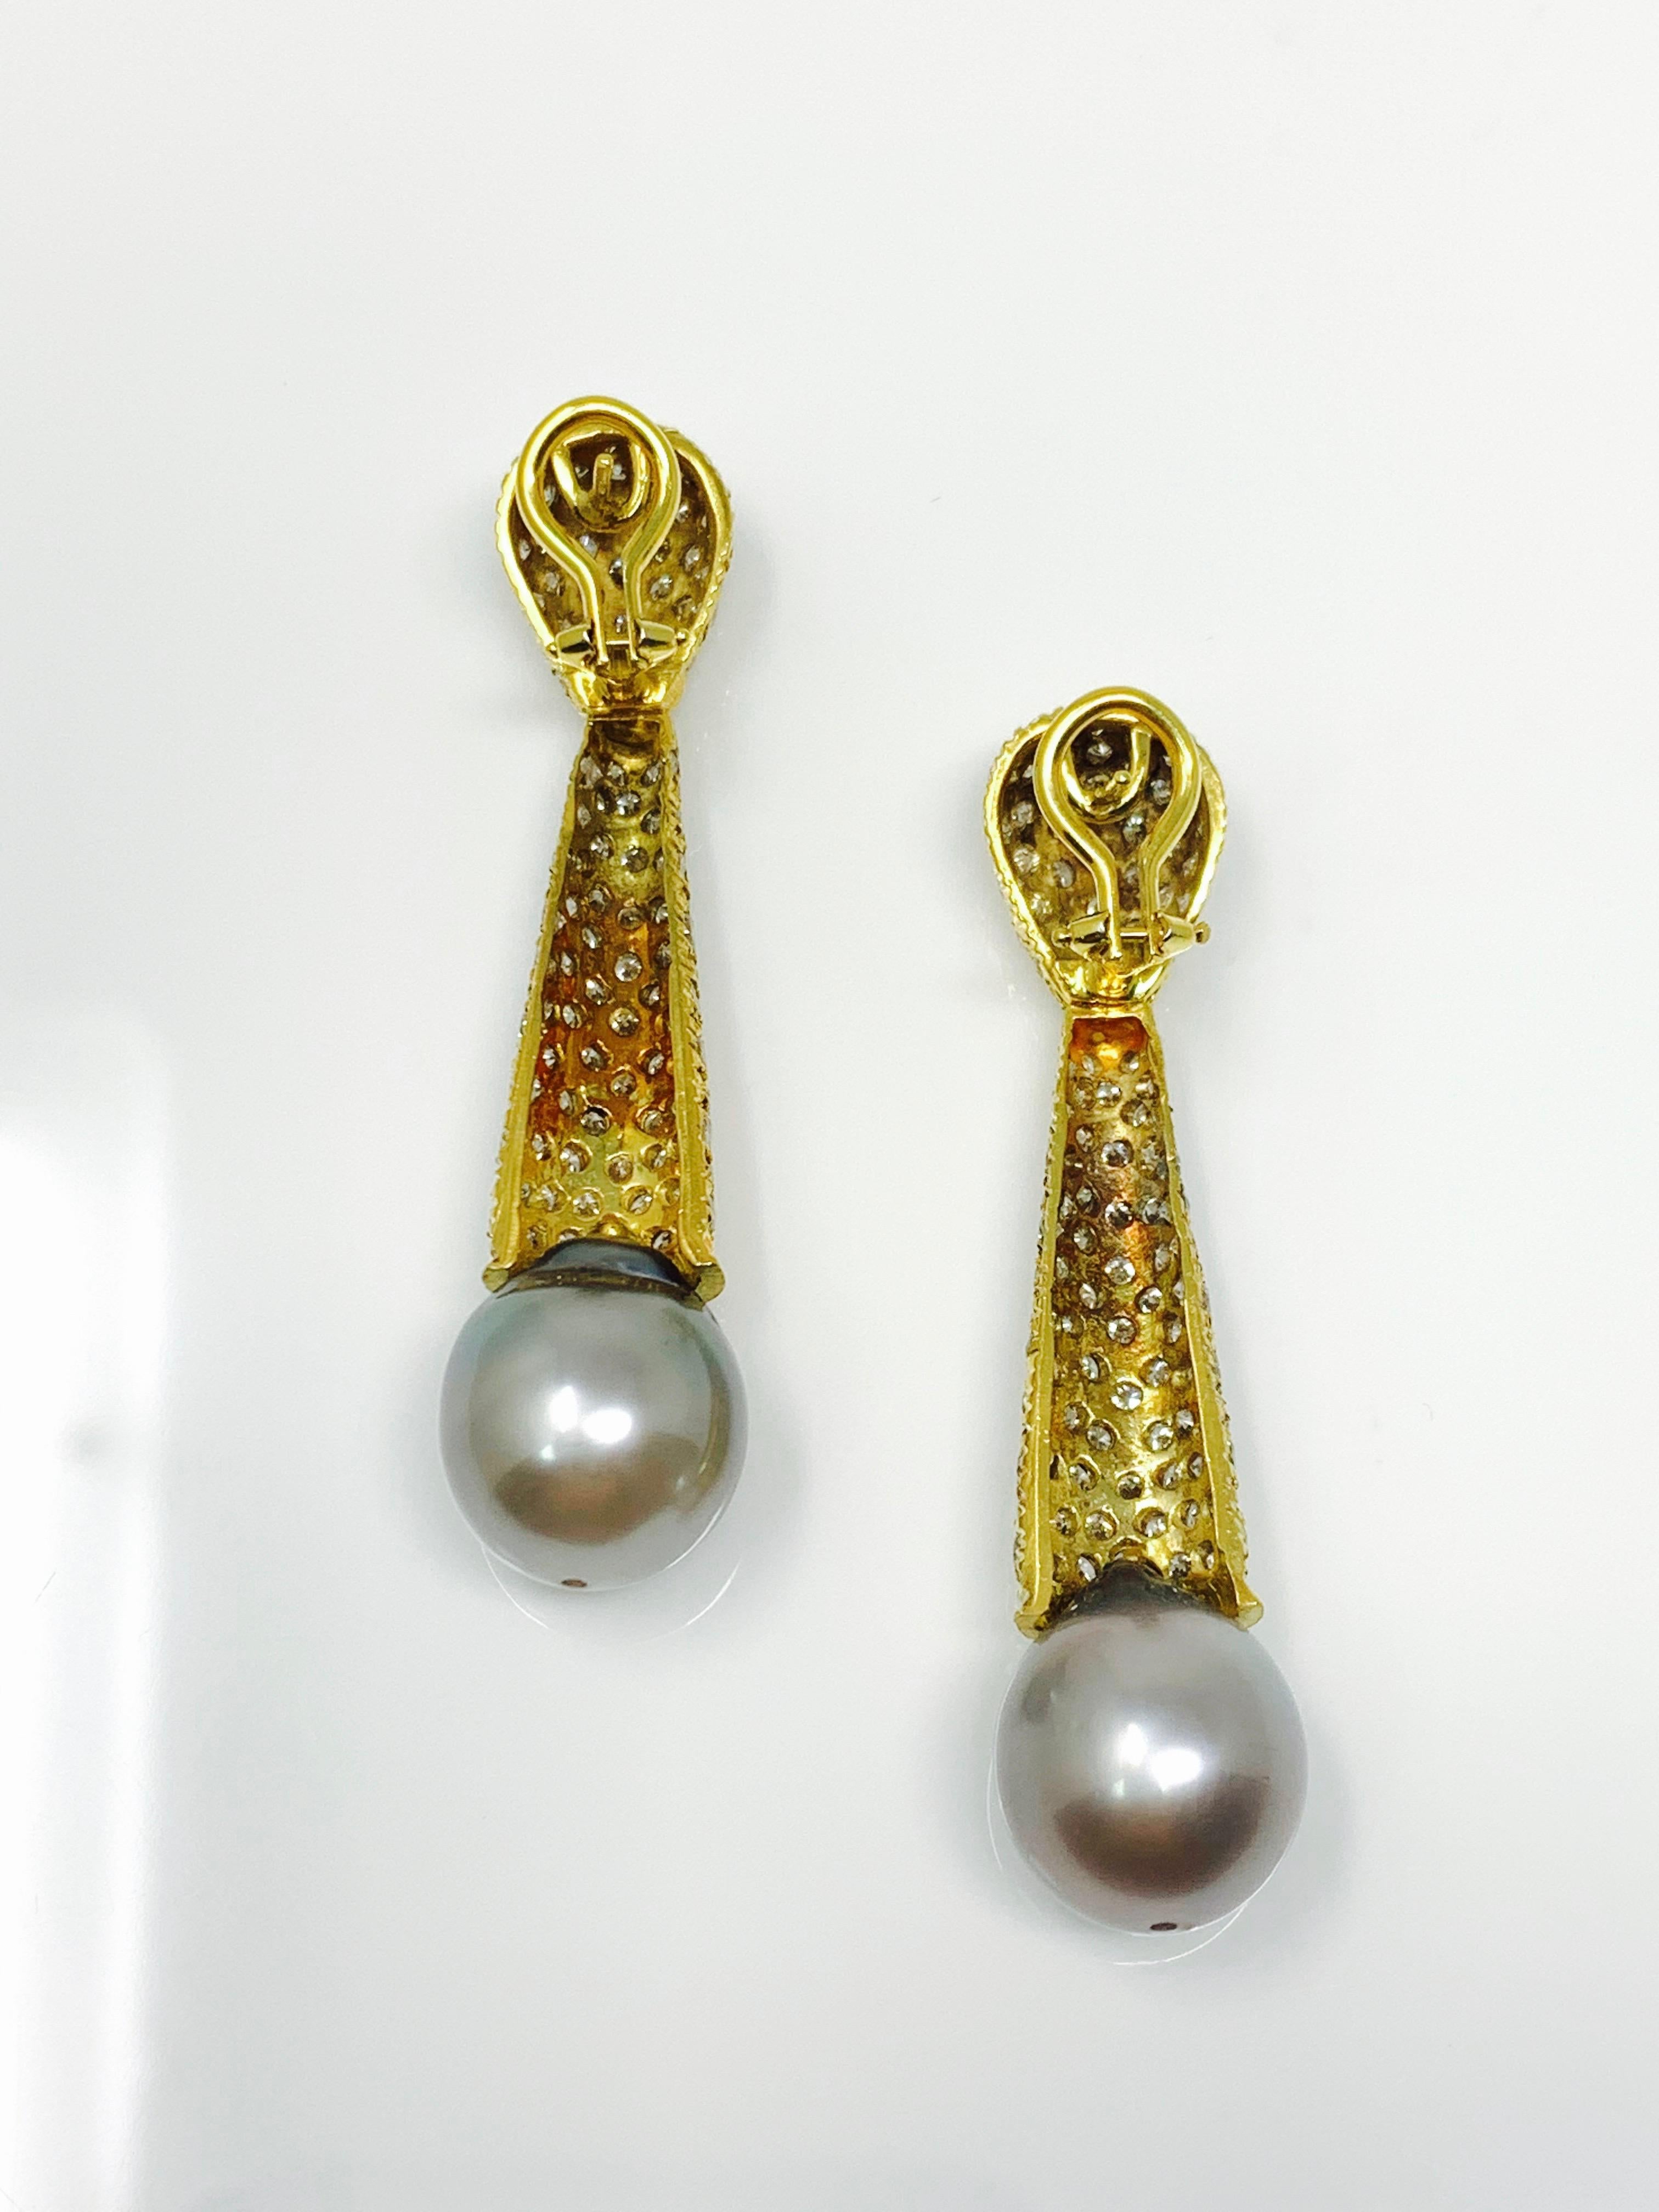 Contemporary 4.80 Carat White Diamond and South Sea Pearl Earrings in 18 Karat Yellow Gold For Sale